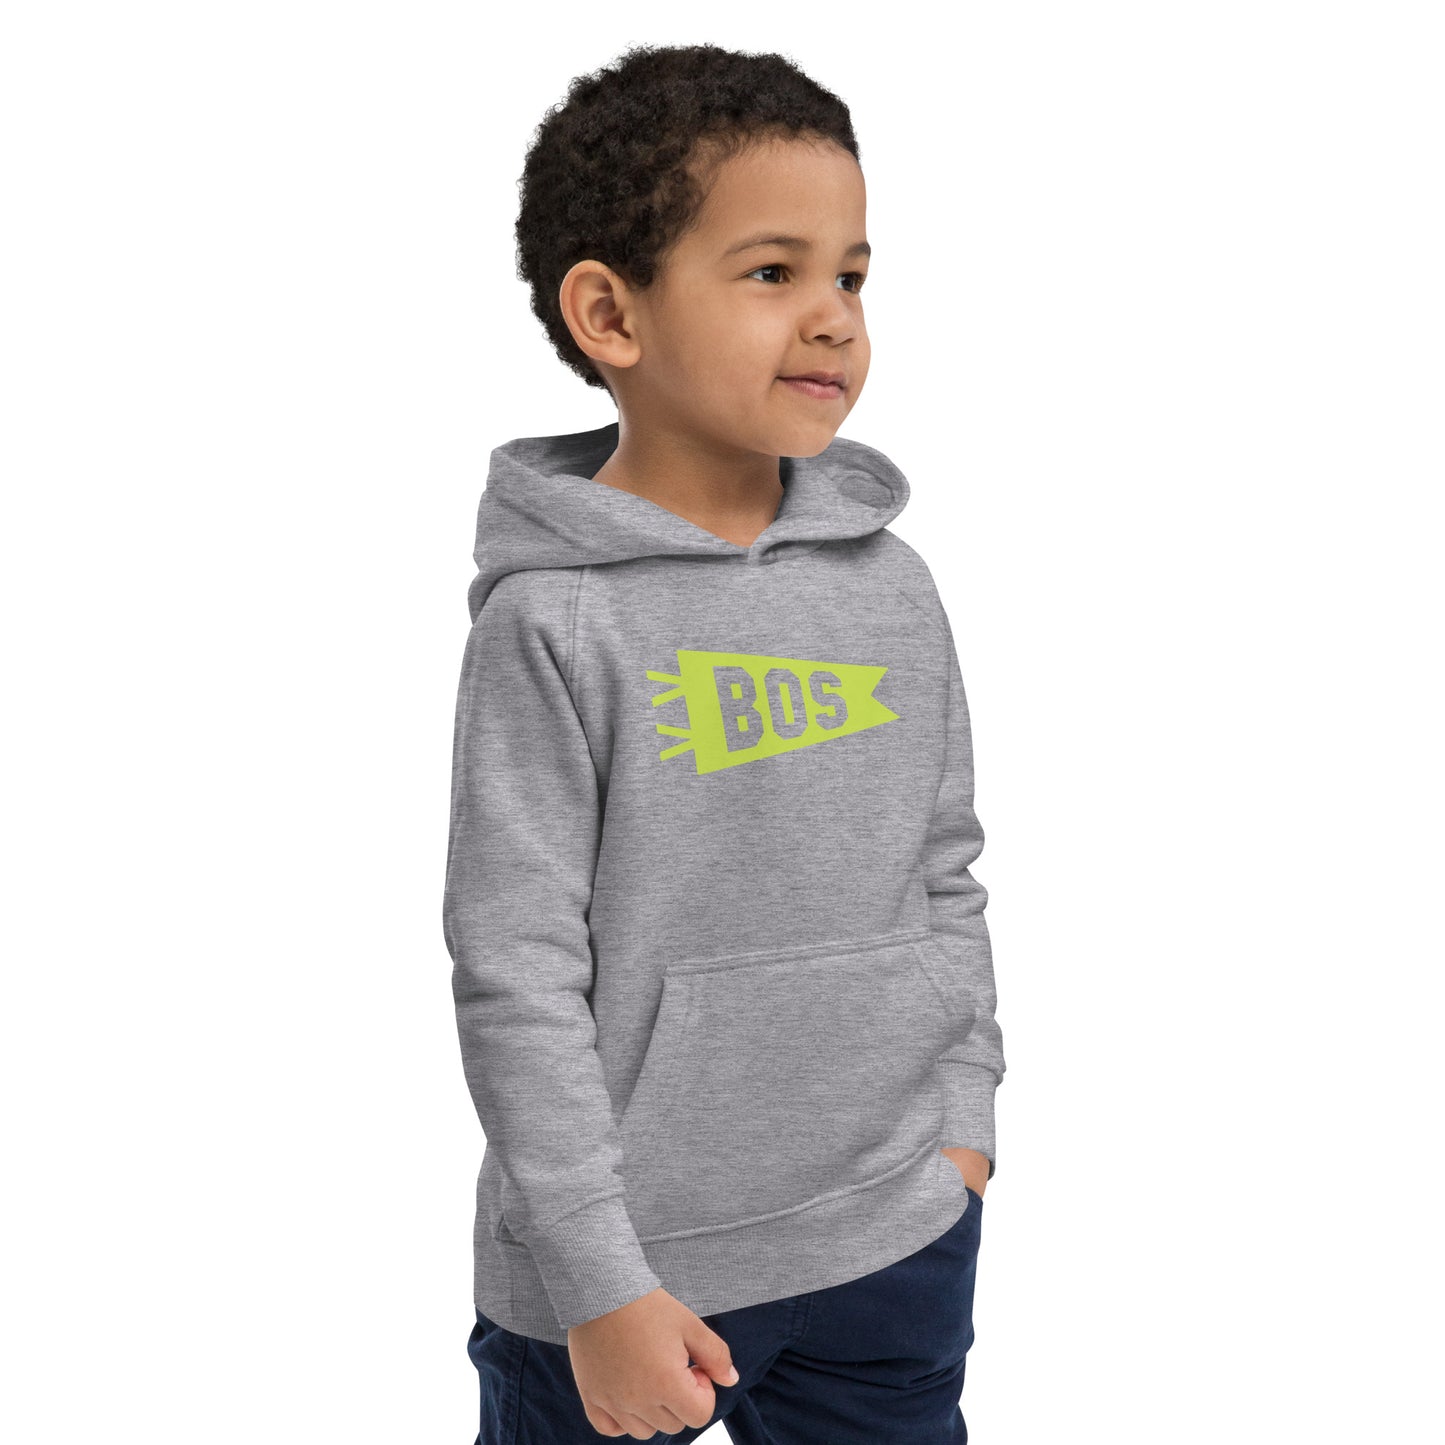 Kid's Sustainable Hoodie - Green Graphic • BOS Boston • YHM Designs - Image 13